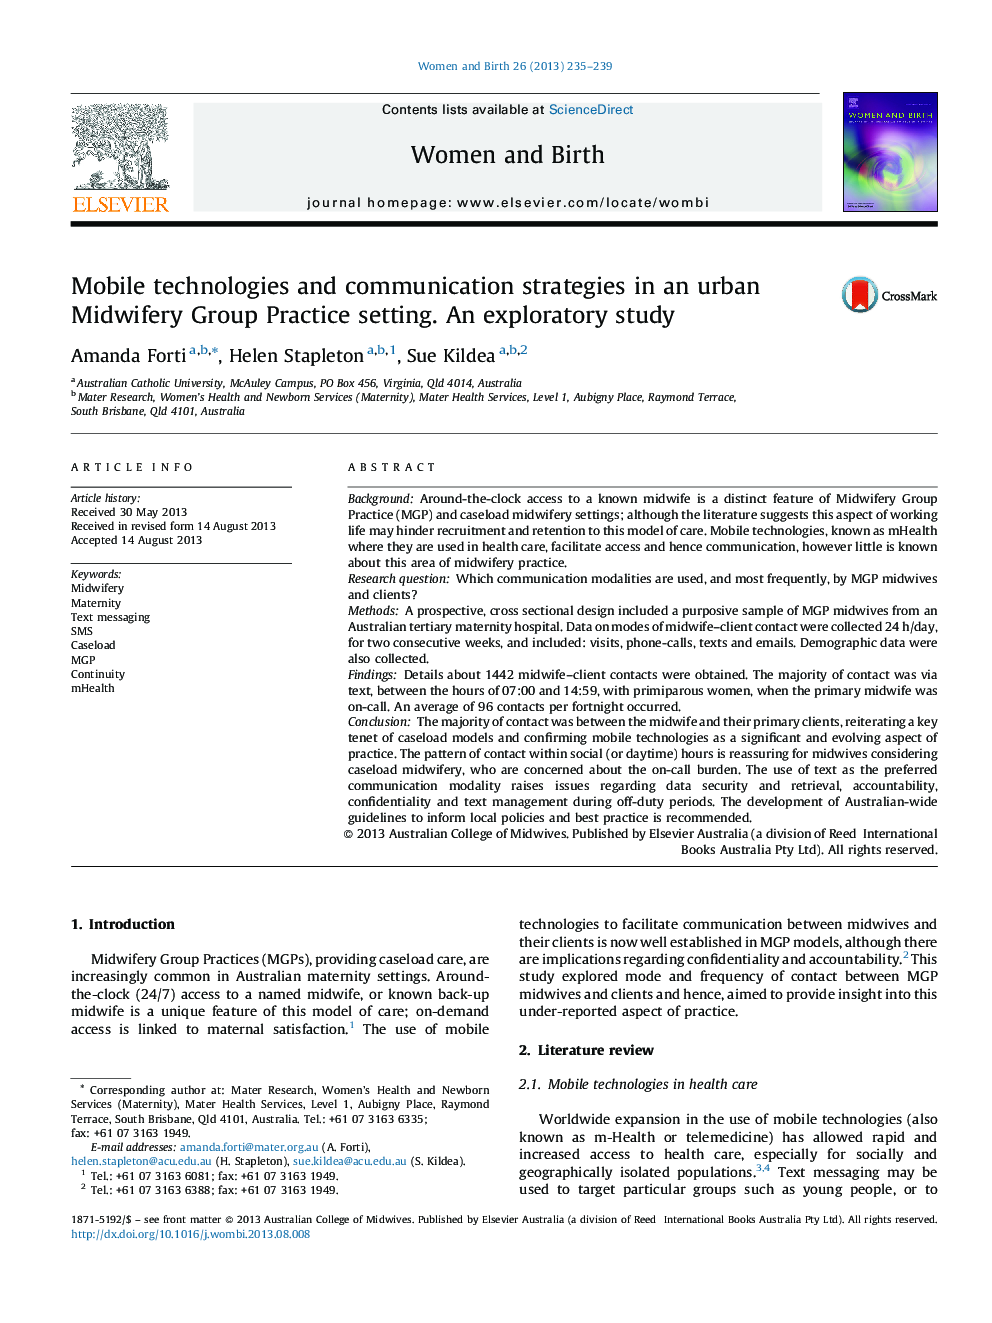 Mobile technologies and communication strategies in an urban Midwifery Group Practice setting. An exploratory study